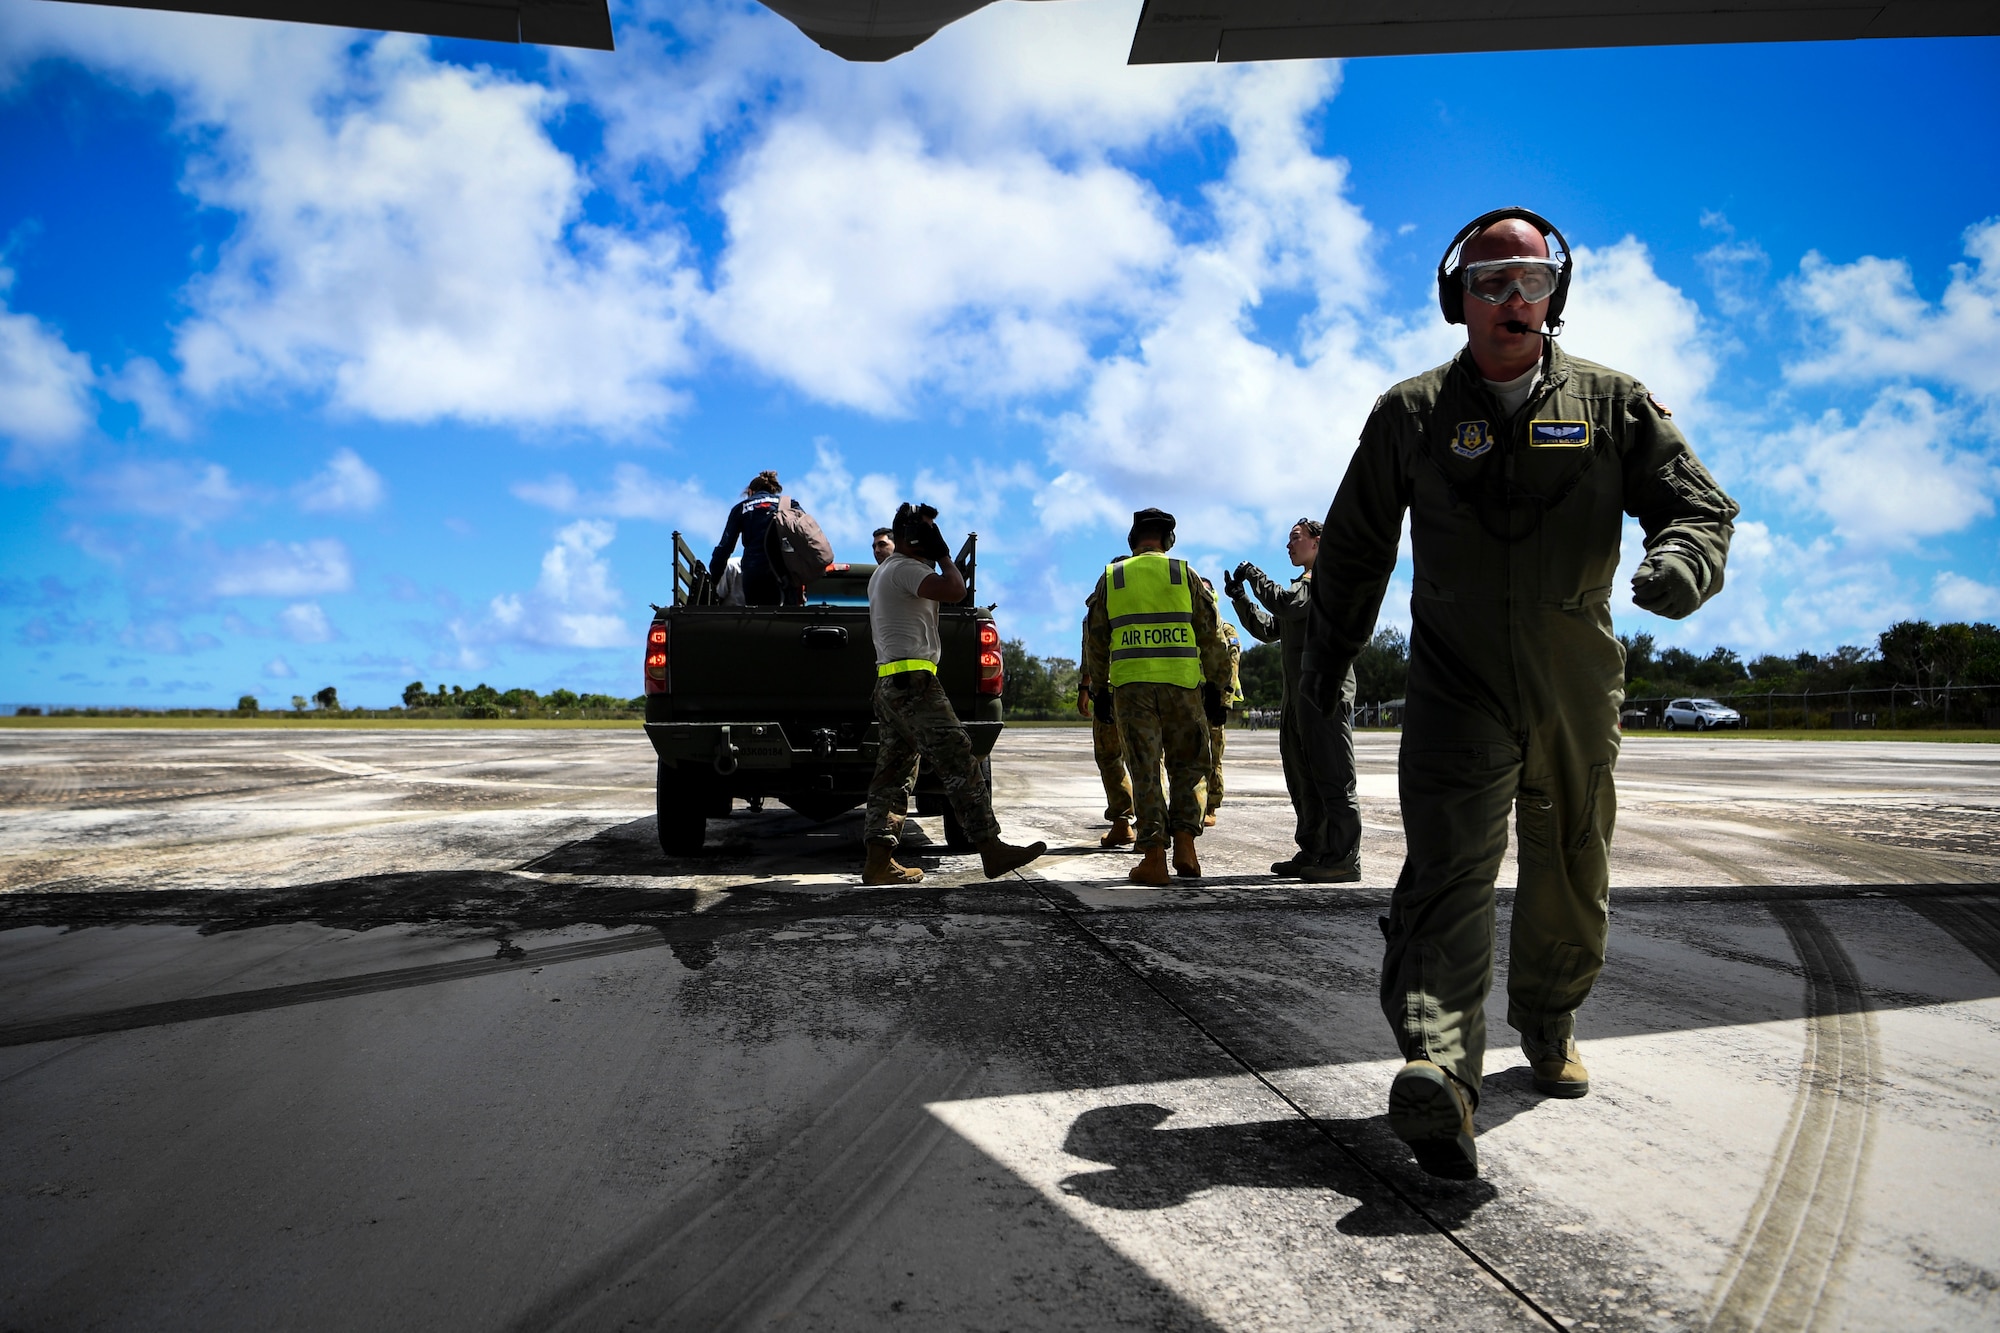 U.S. Air Force Master Sgt. Ryan McClellan, 36th Aeromedical Evacuation Squadron technician, boards a U.S. Air Force C-130J Super Hercules during an aeromedical mission at Rota, U.S. Commonwealth of the Northern Mariana Islands, during exercise COPE NORTH 18, Feb. 19.